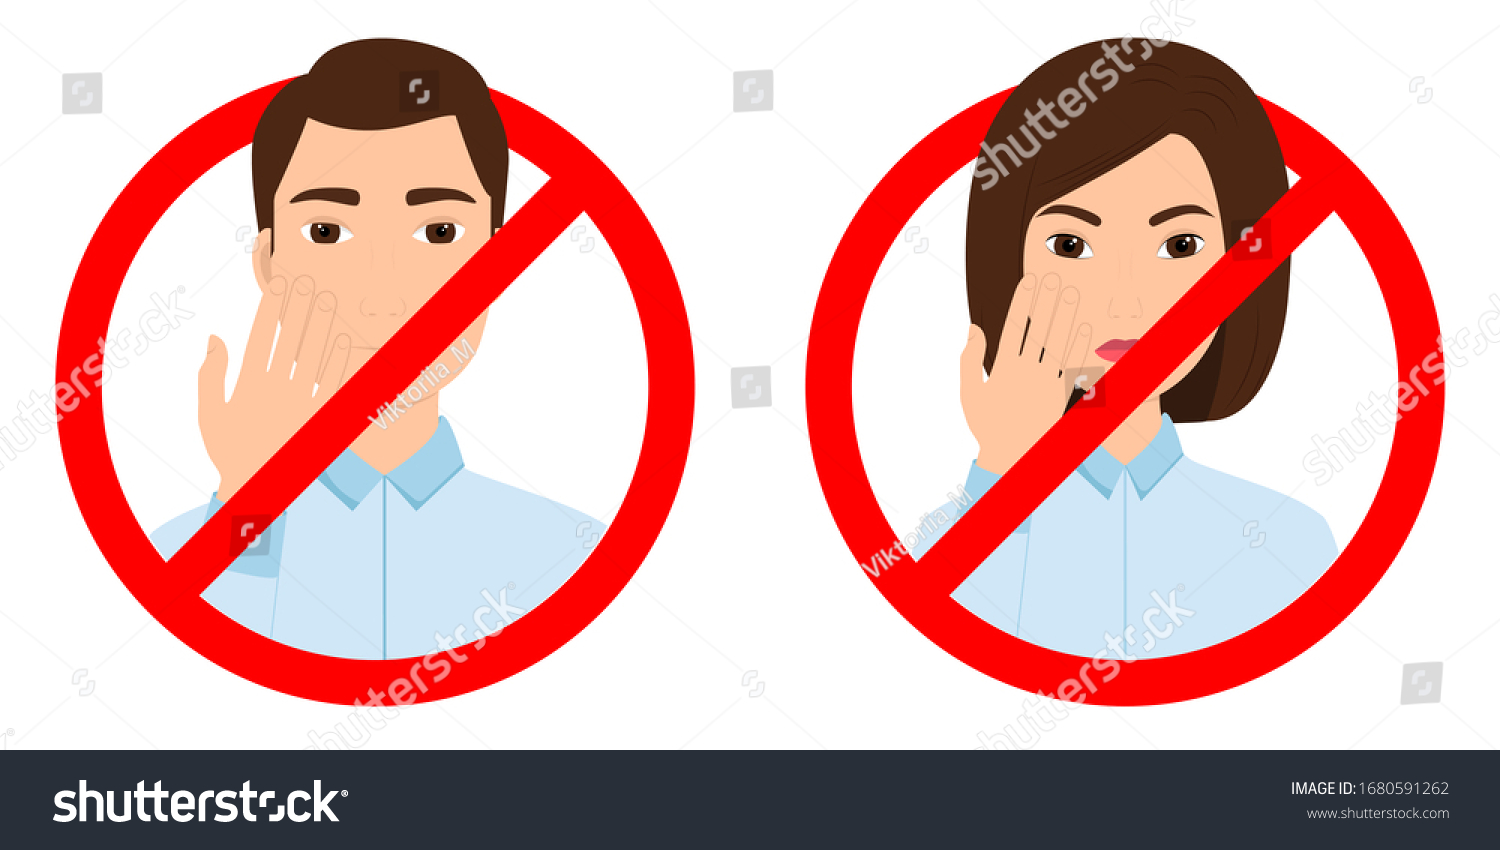 SVG of Prohibition of touching the face. Red stop signs with man and woman. Vector illustration svg